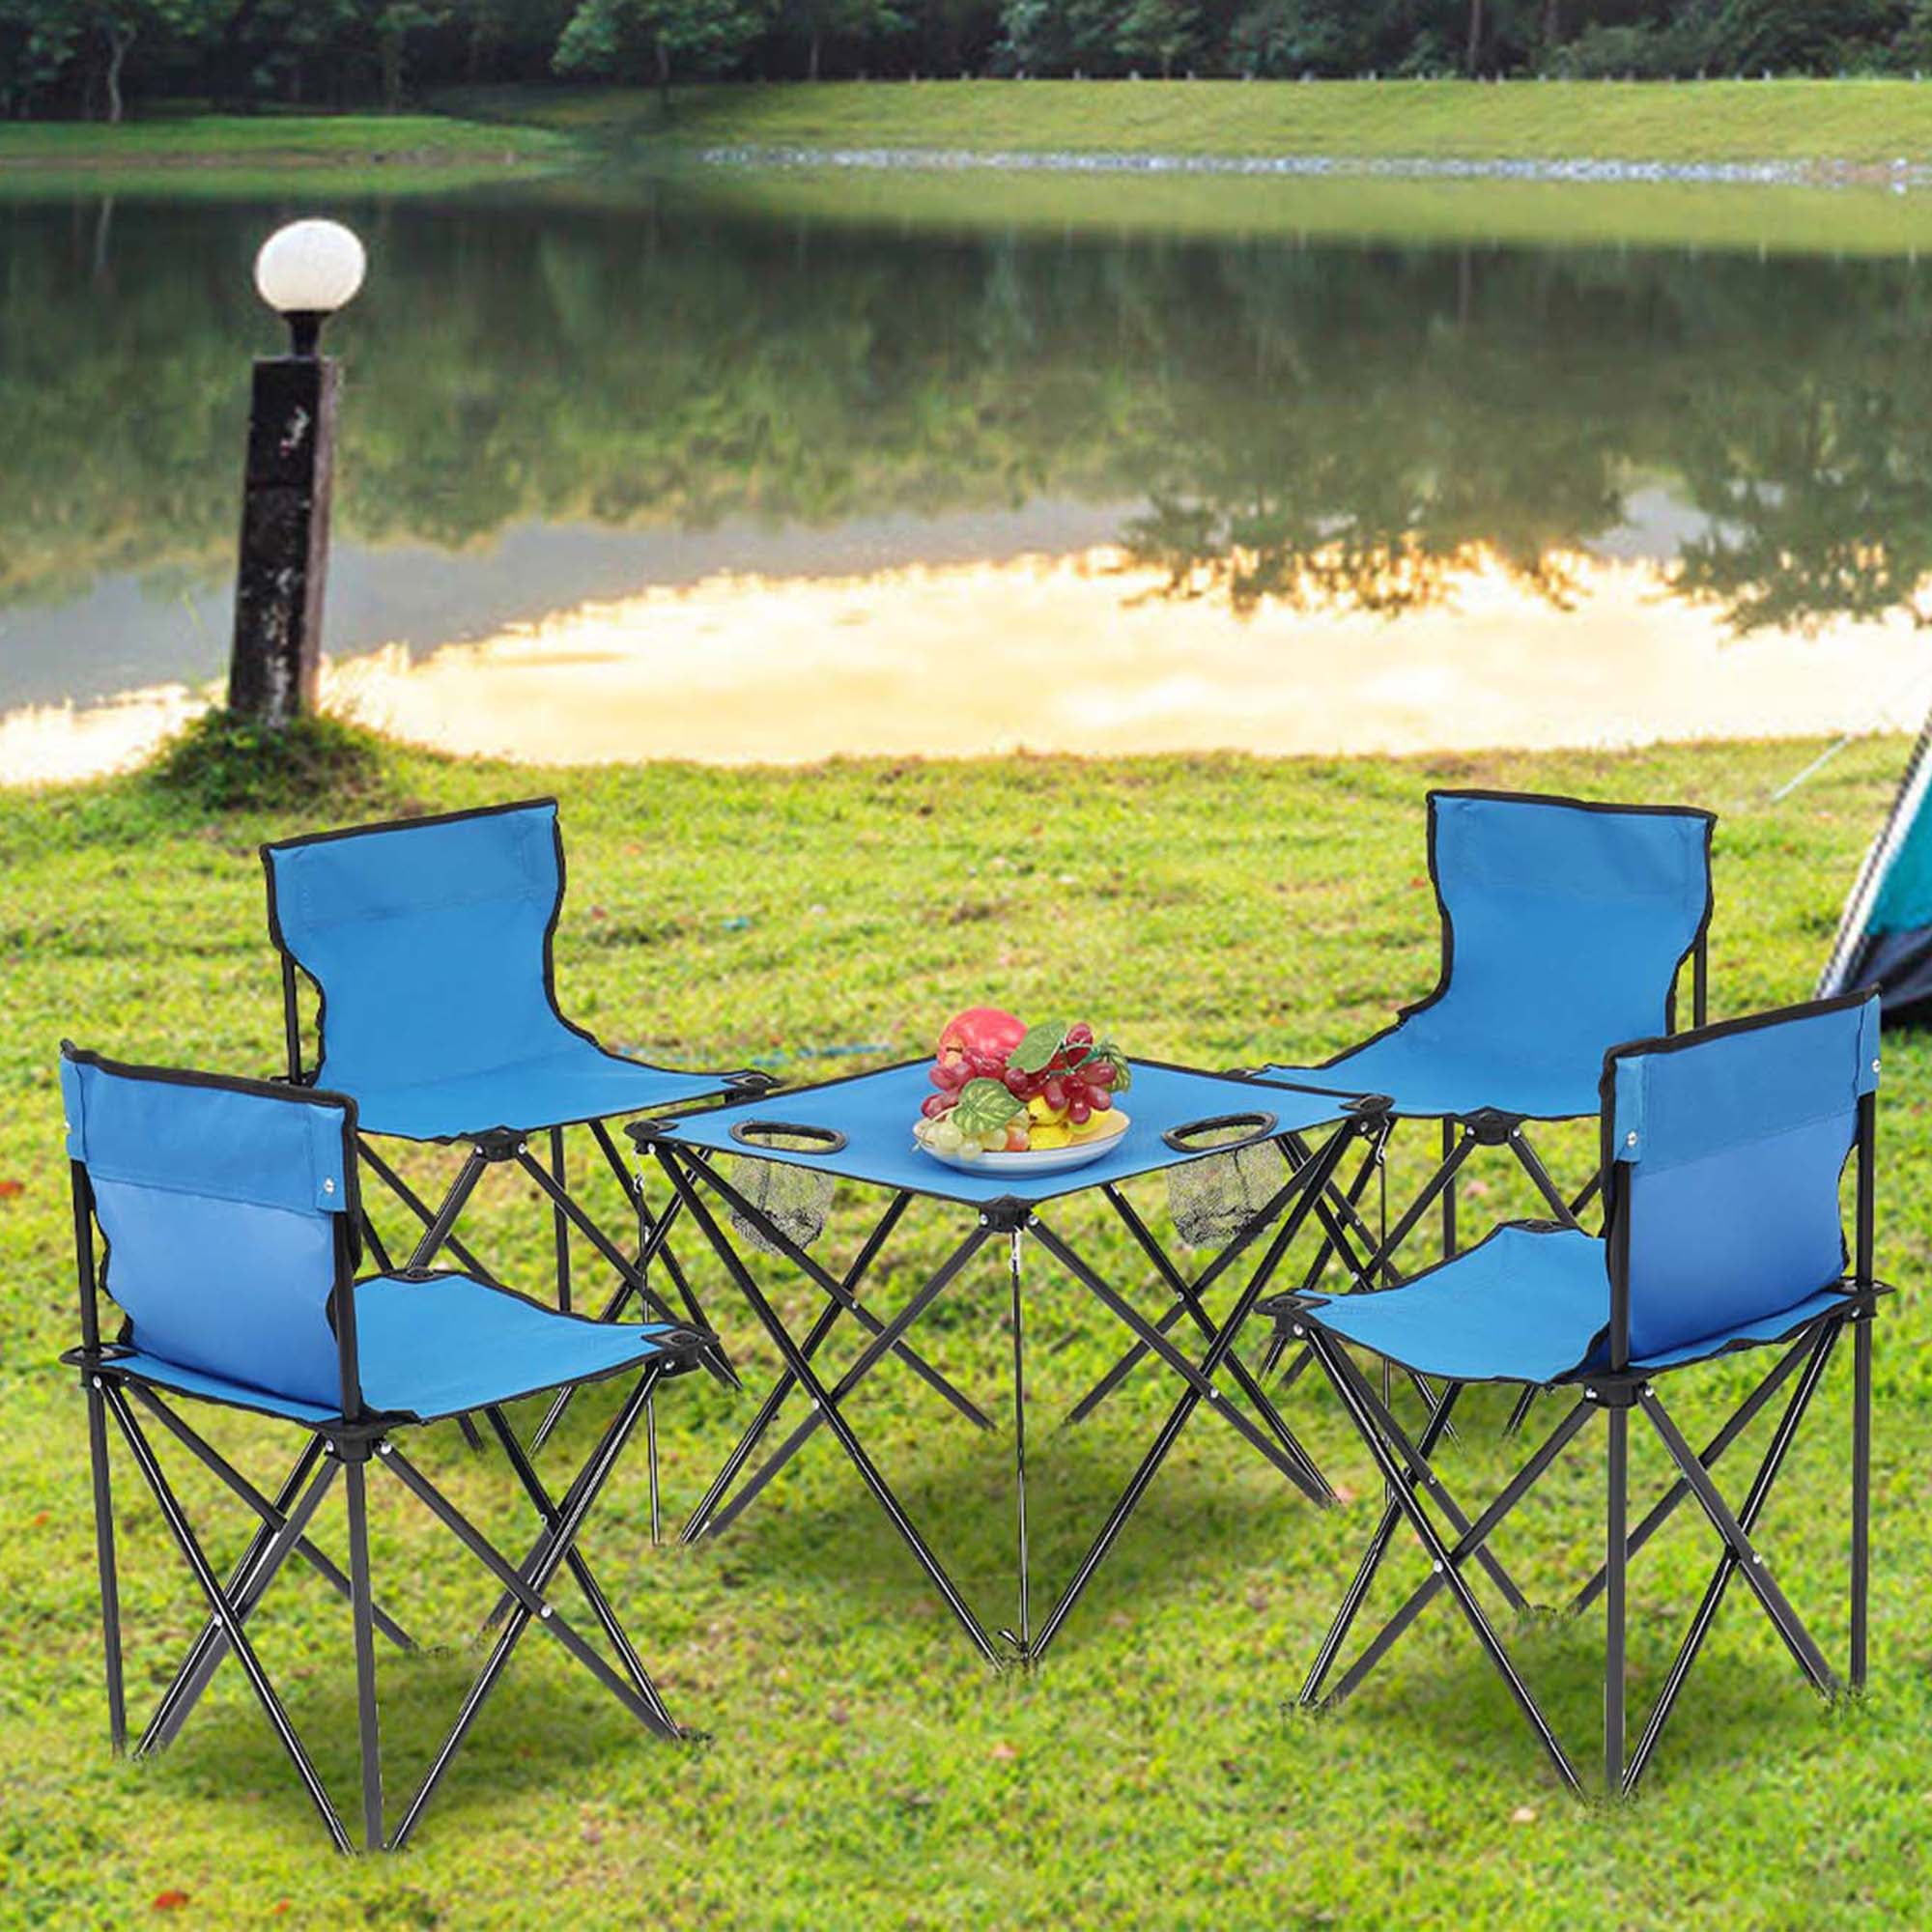 Details about   Chairs Foldable Portable Furniture Convenient Outdoor camping Fishing Retractabl 